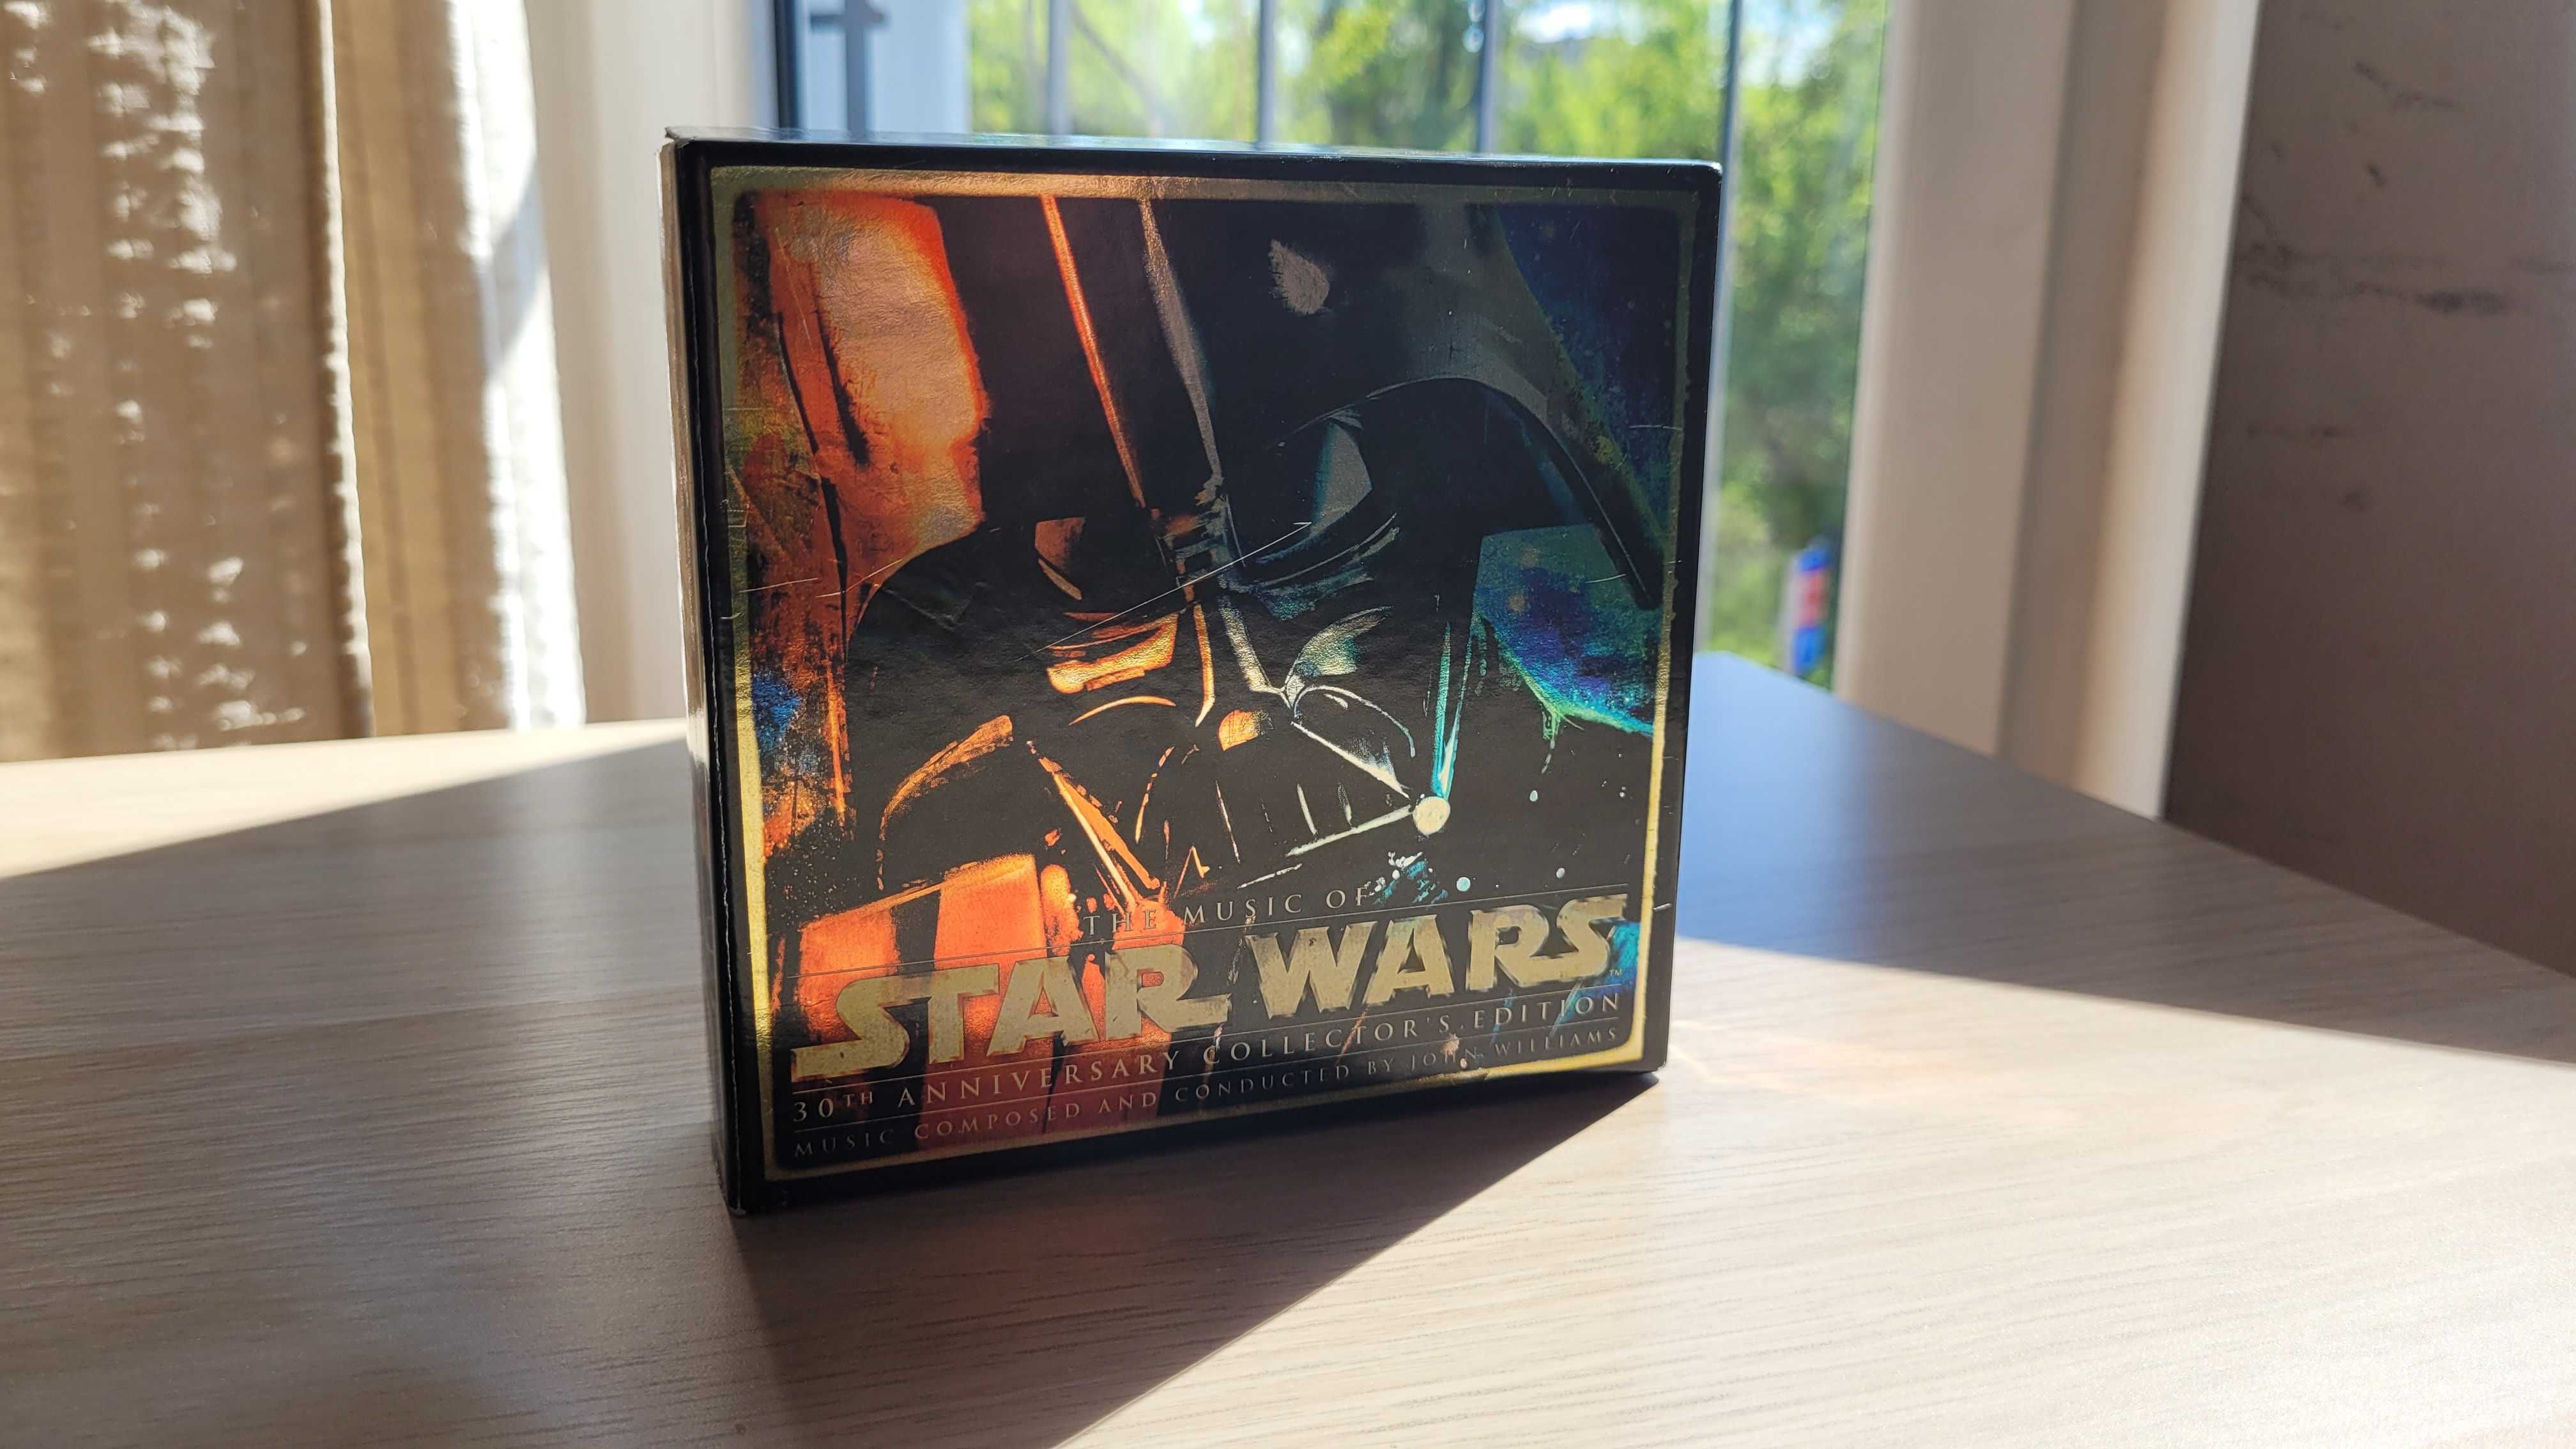 Star Wars 30th Anniversary Collector's Edition Soundtrack